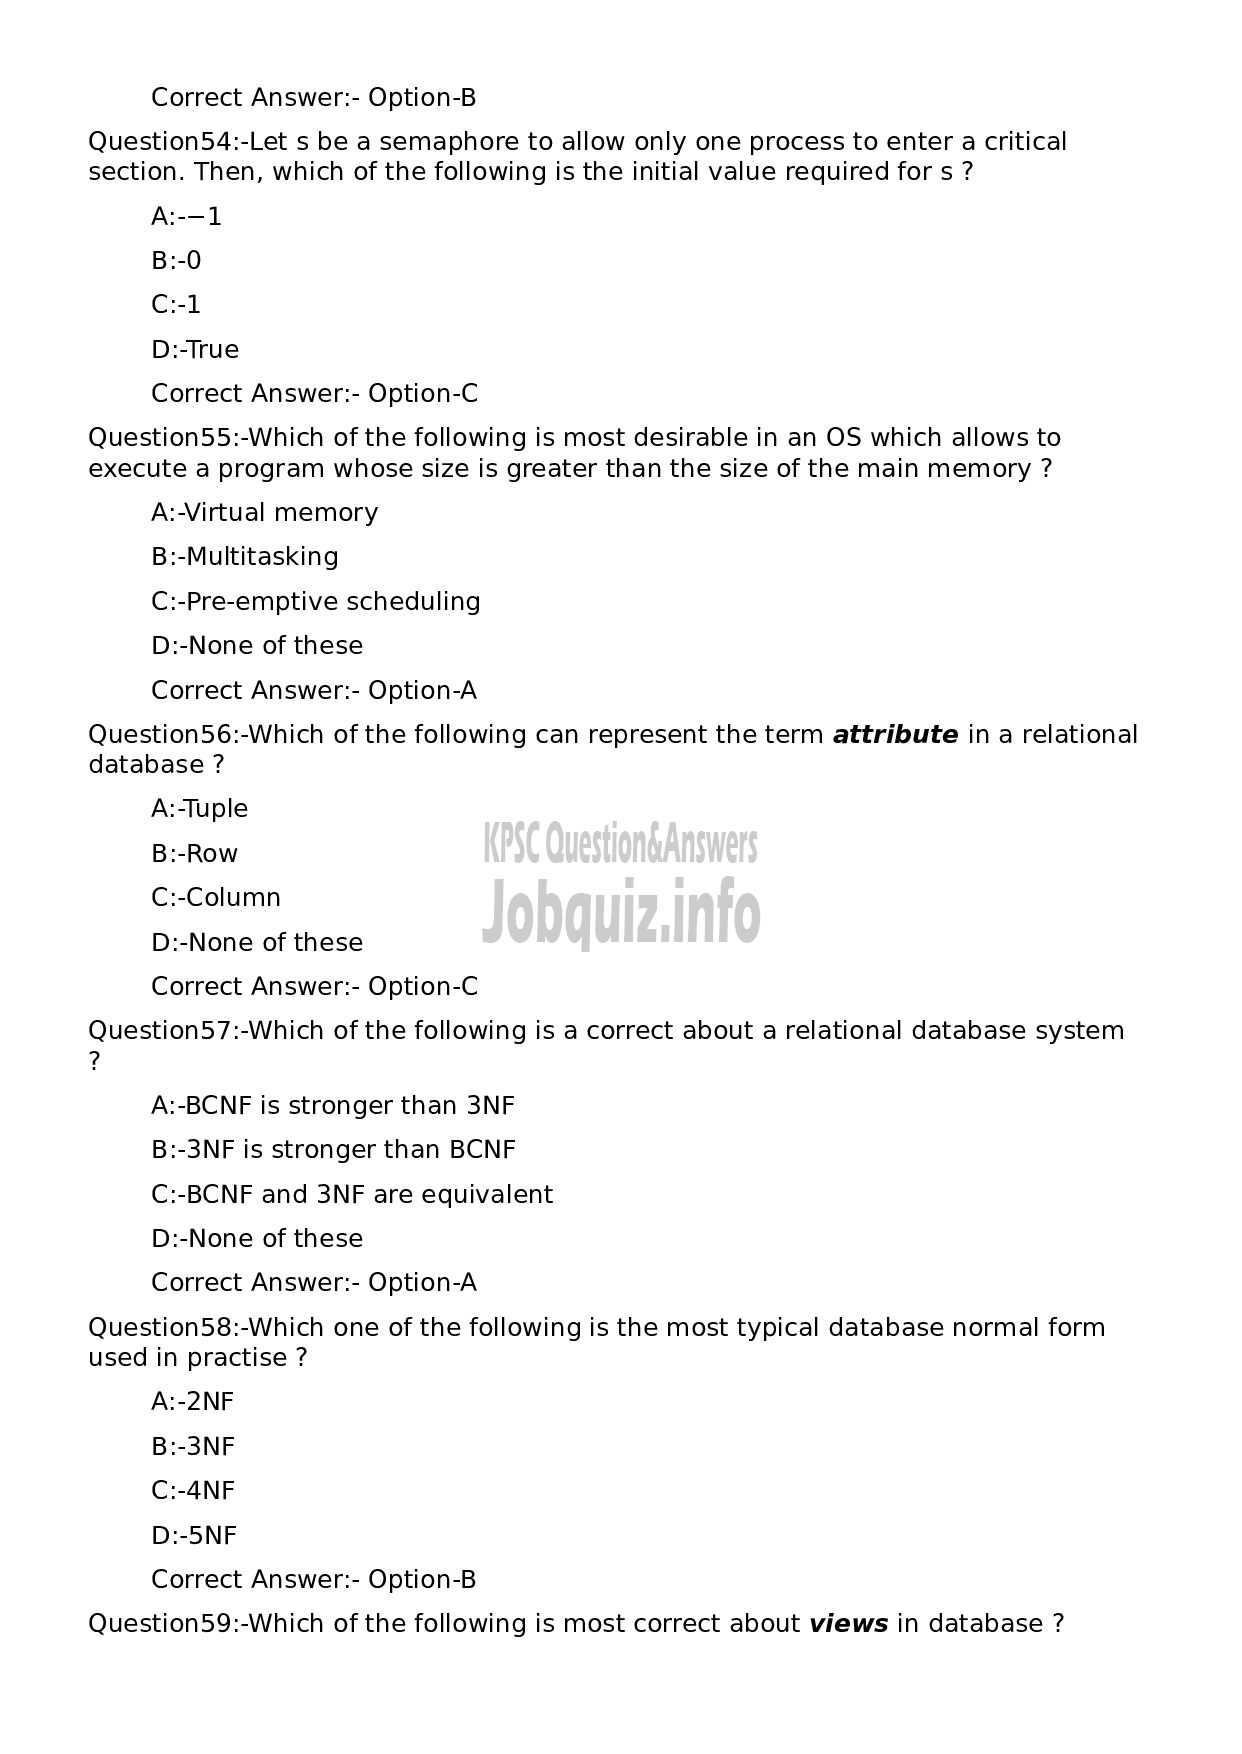 Kerala PSC Question Paper - Assistant Professor in Information Technology-12